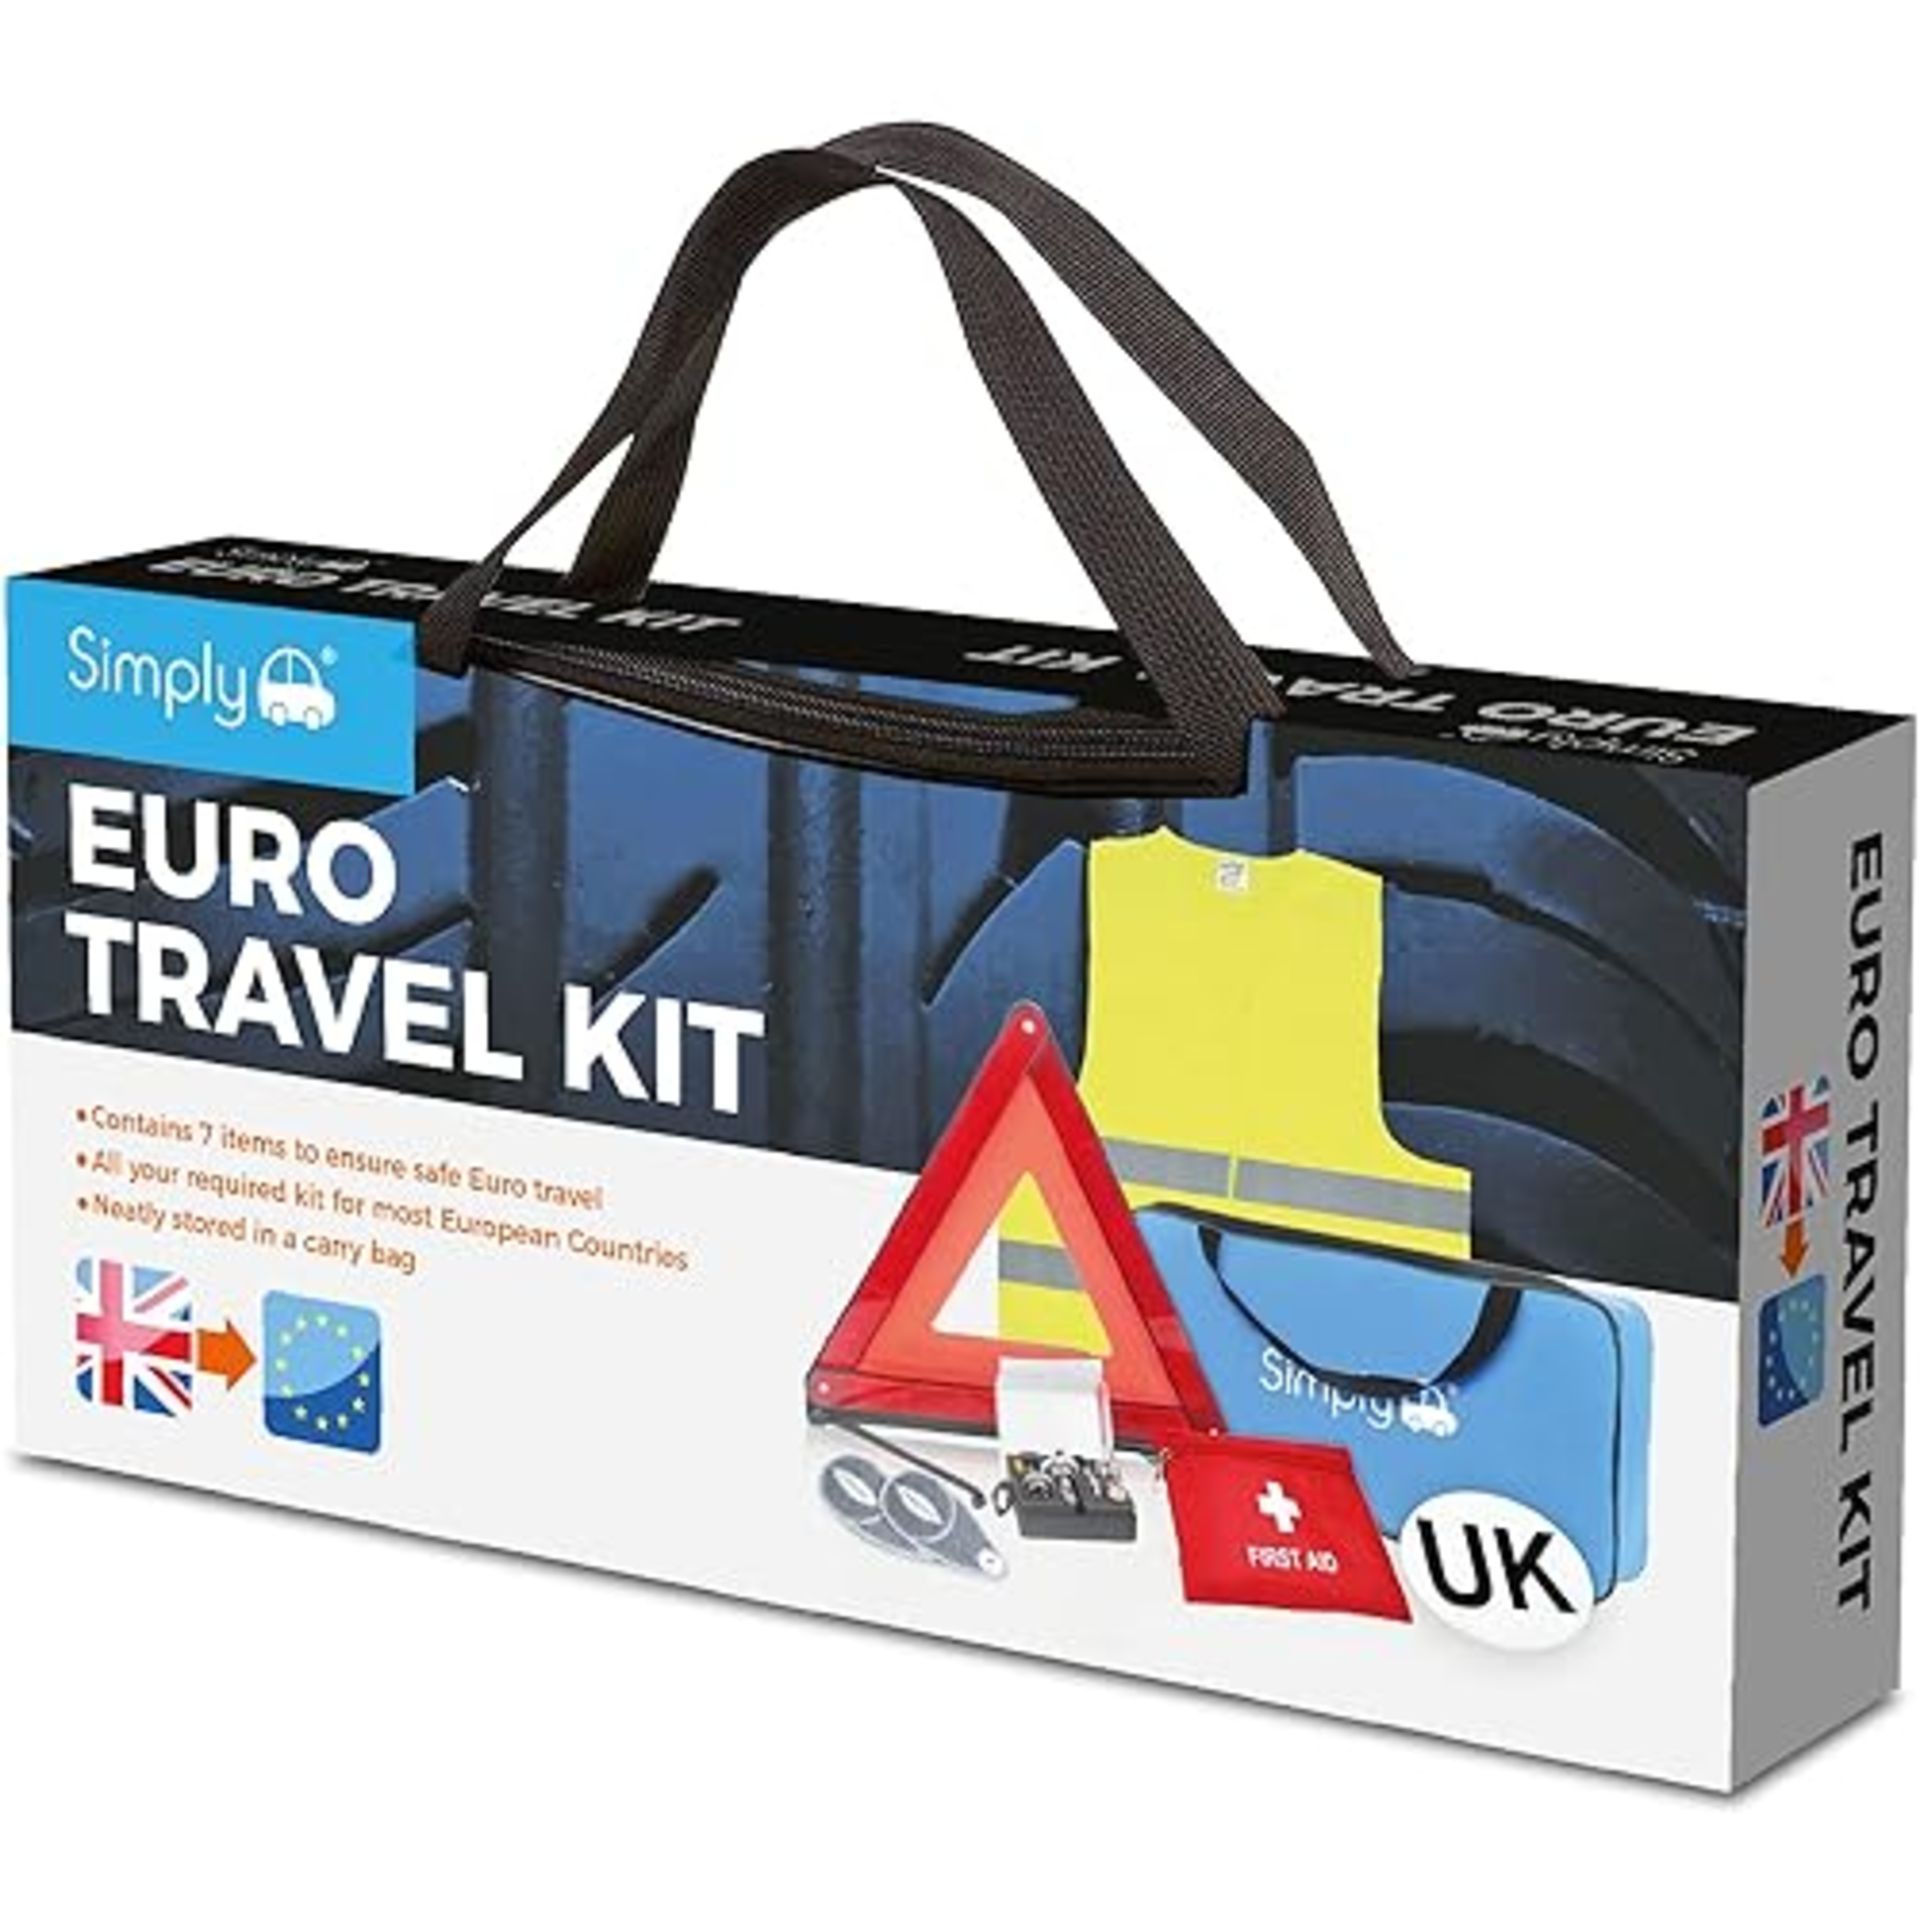 Simply ETK1 Europe Travel Kit. 7 Piece Set includes Warning Triangle, Reflective Vest, Headlight Be